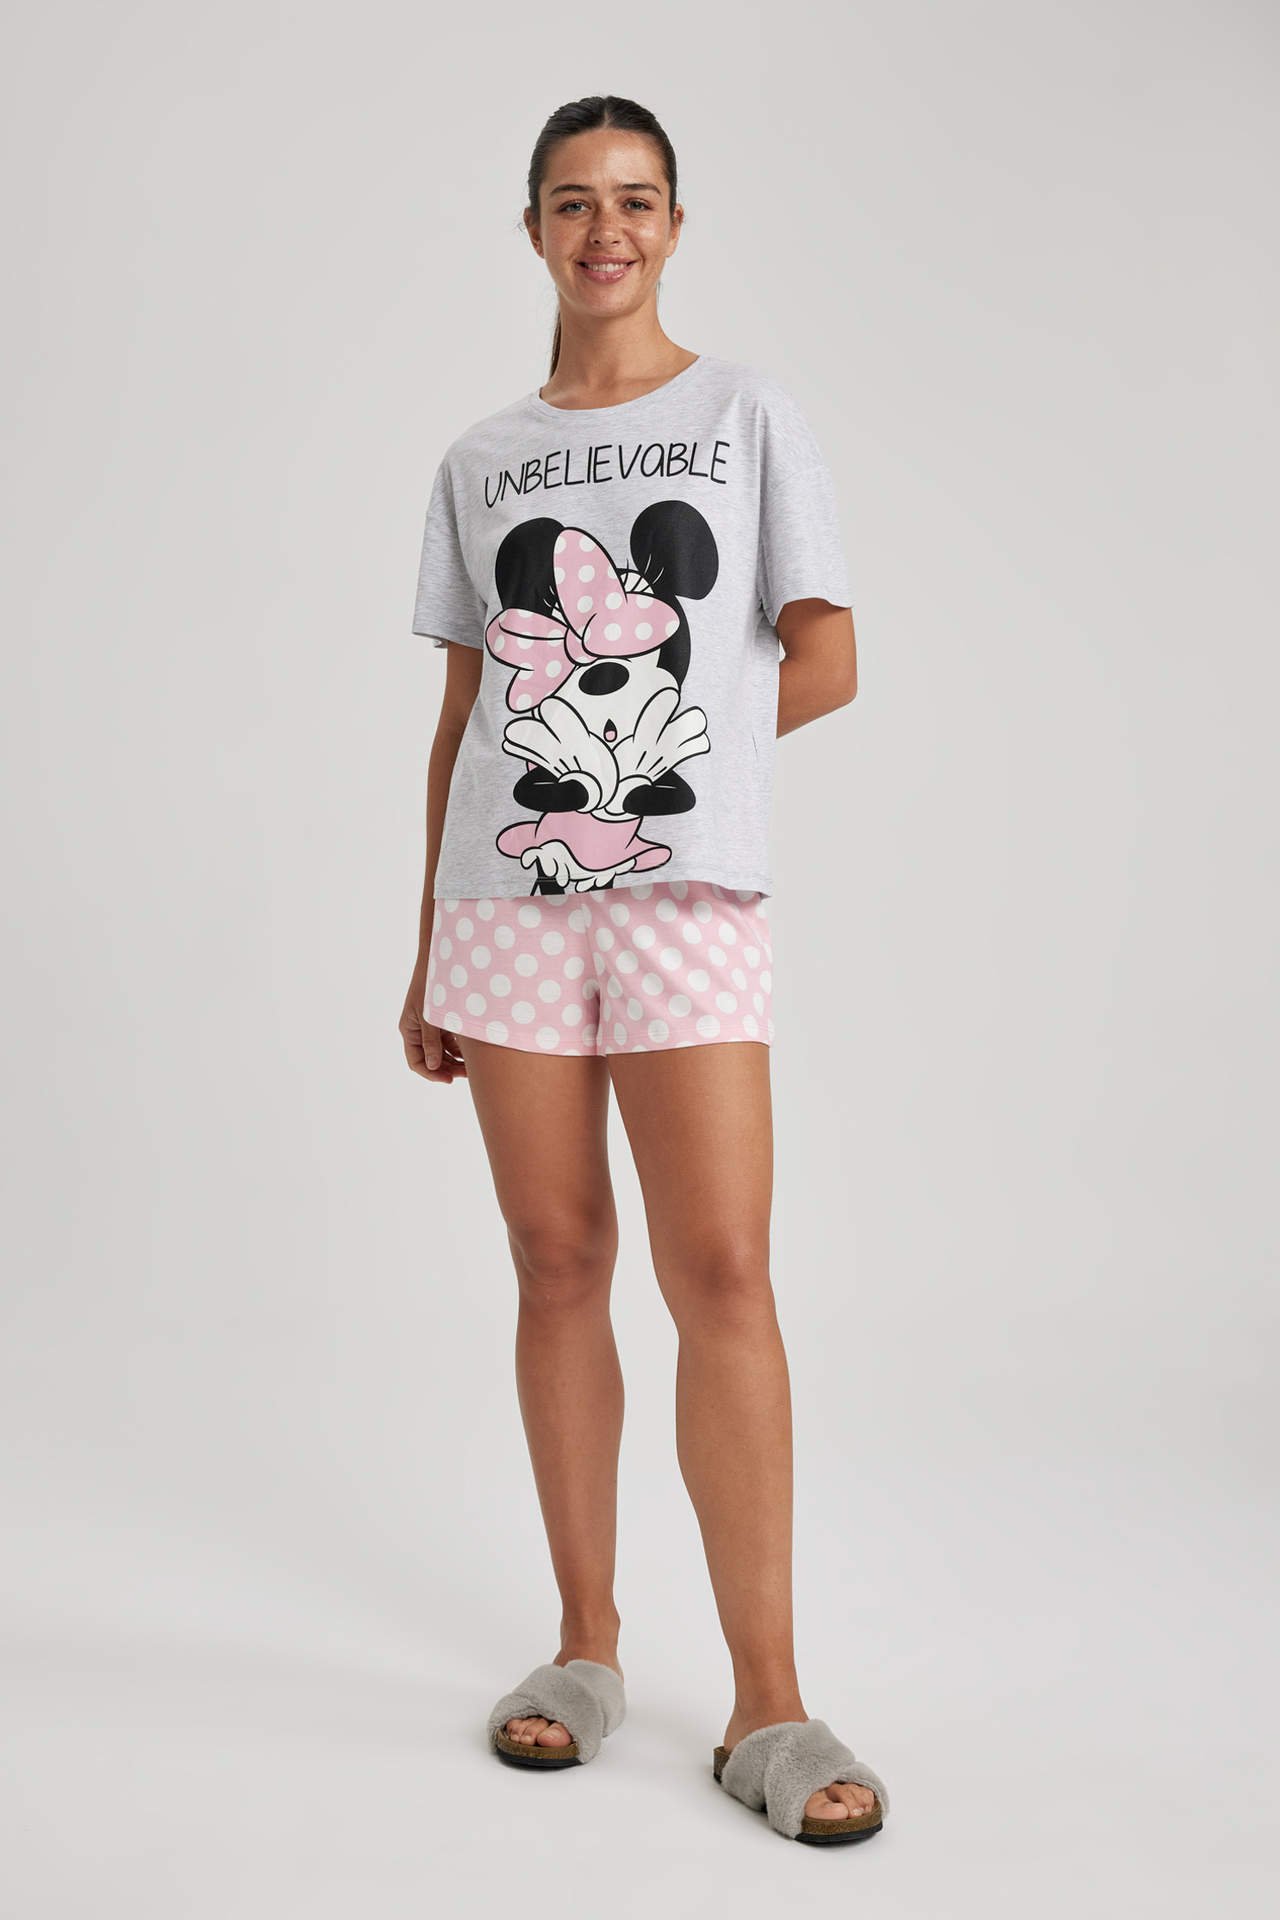 DEFACTO 2 piece Regular Fit Mickey & Minnie Licensed Knitted Sets